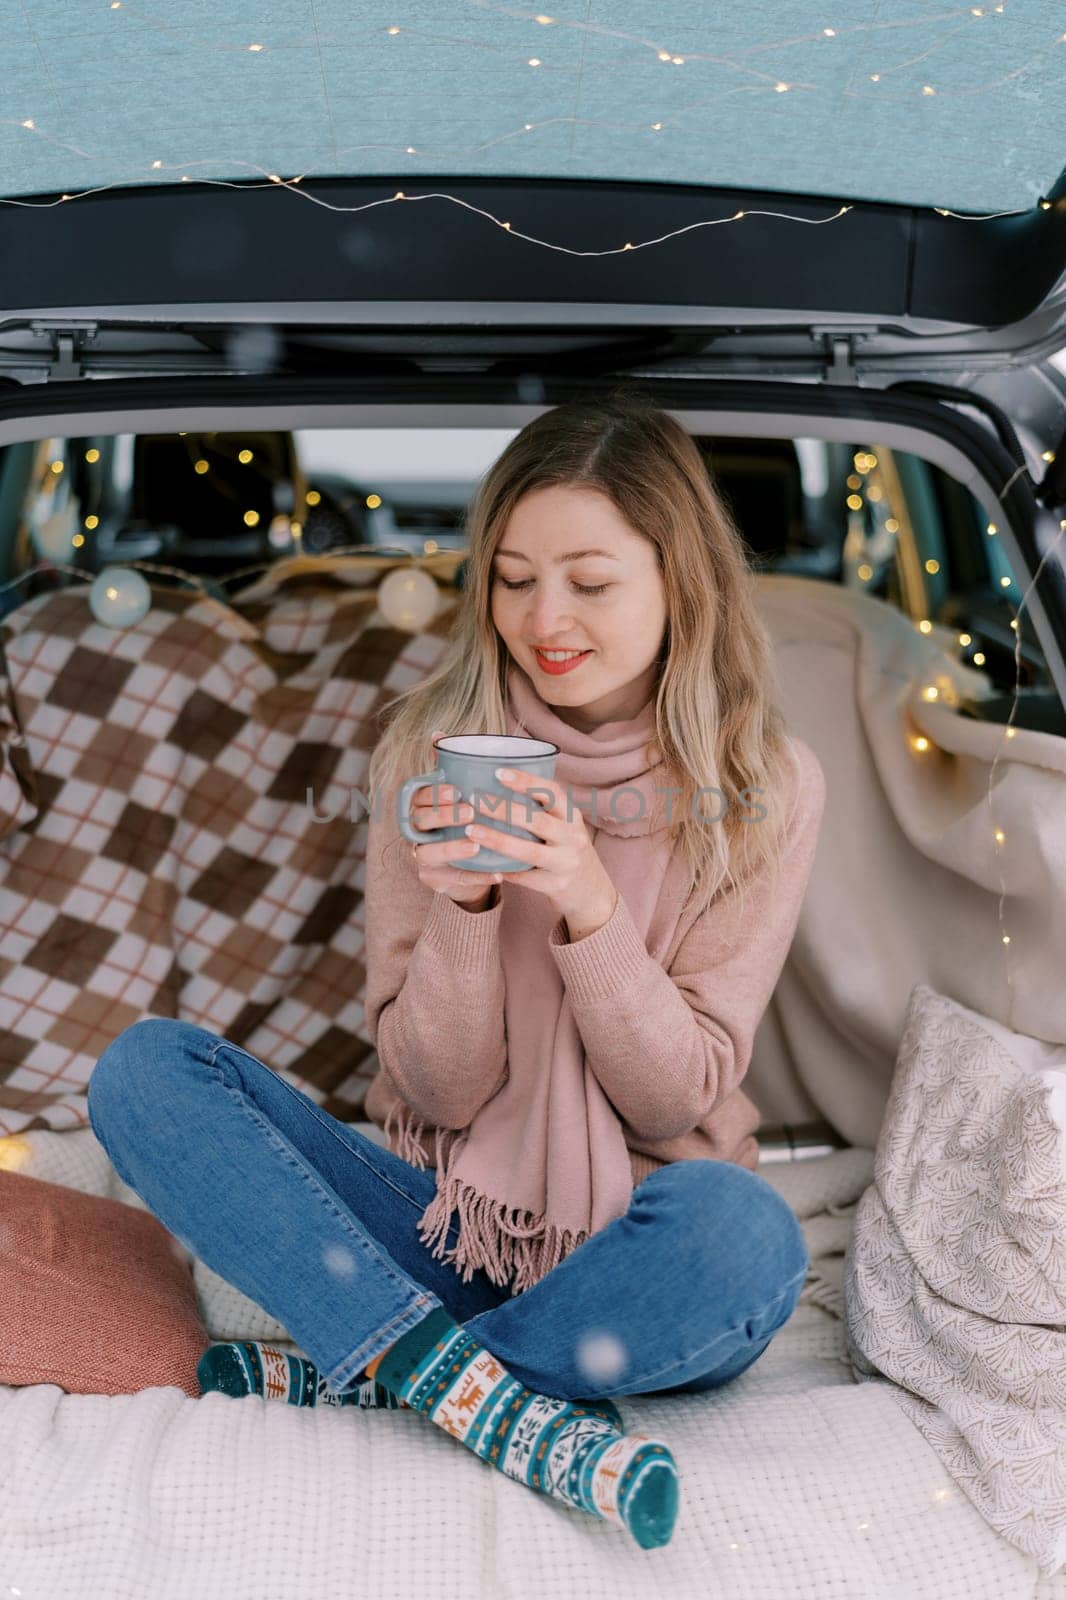 Smiling girl sits cross-legged on a blanket in the trunk of a car and looks at a cup of coffee in her hands. High quality photo